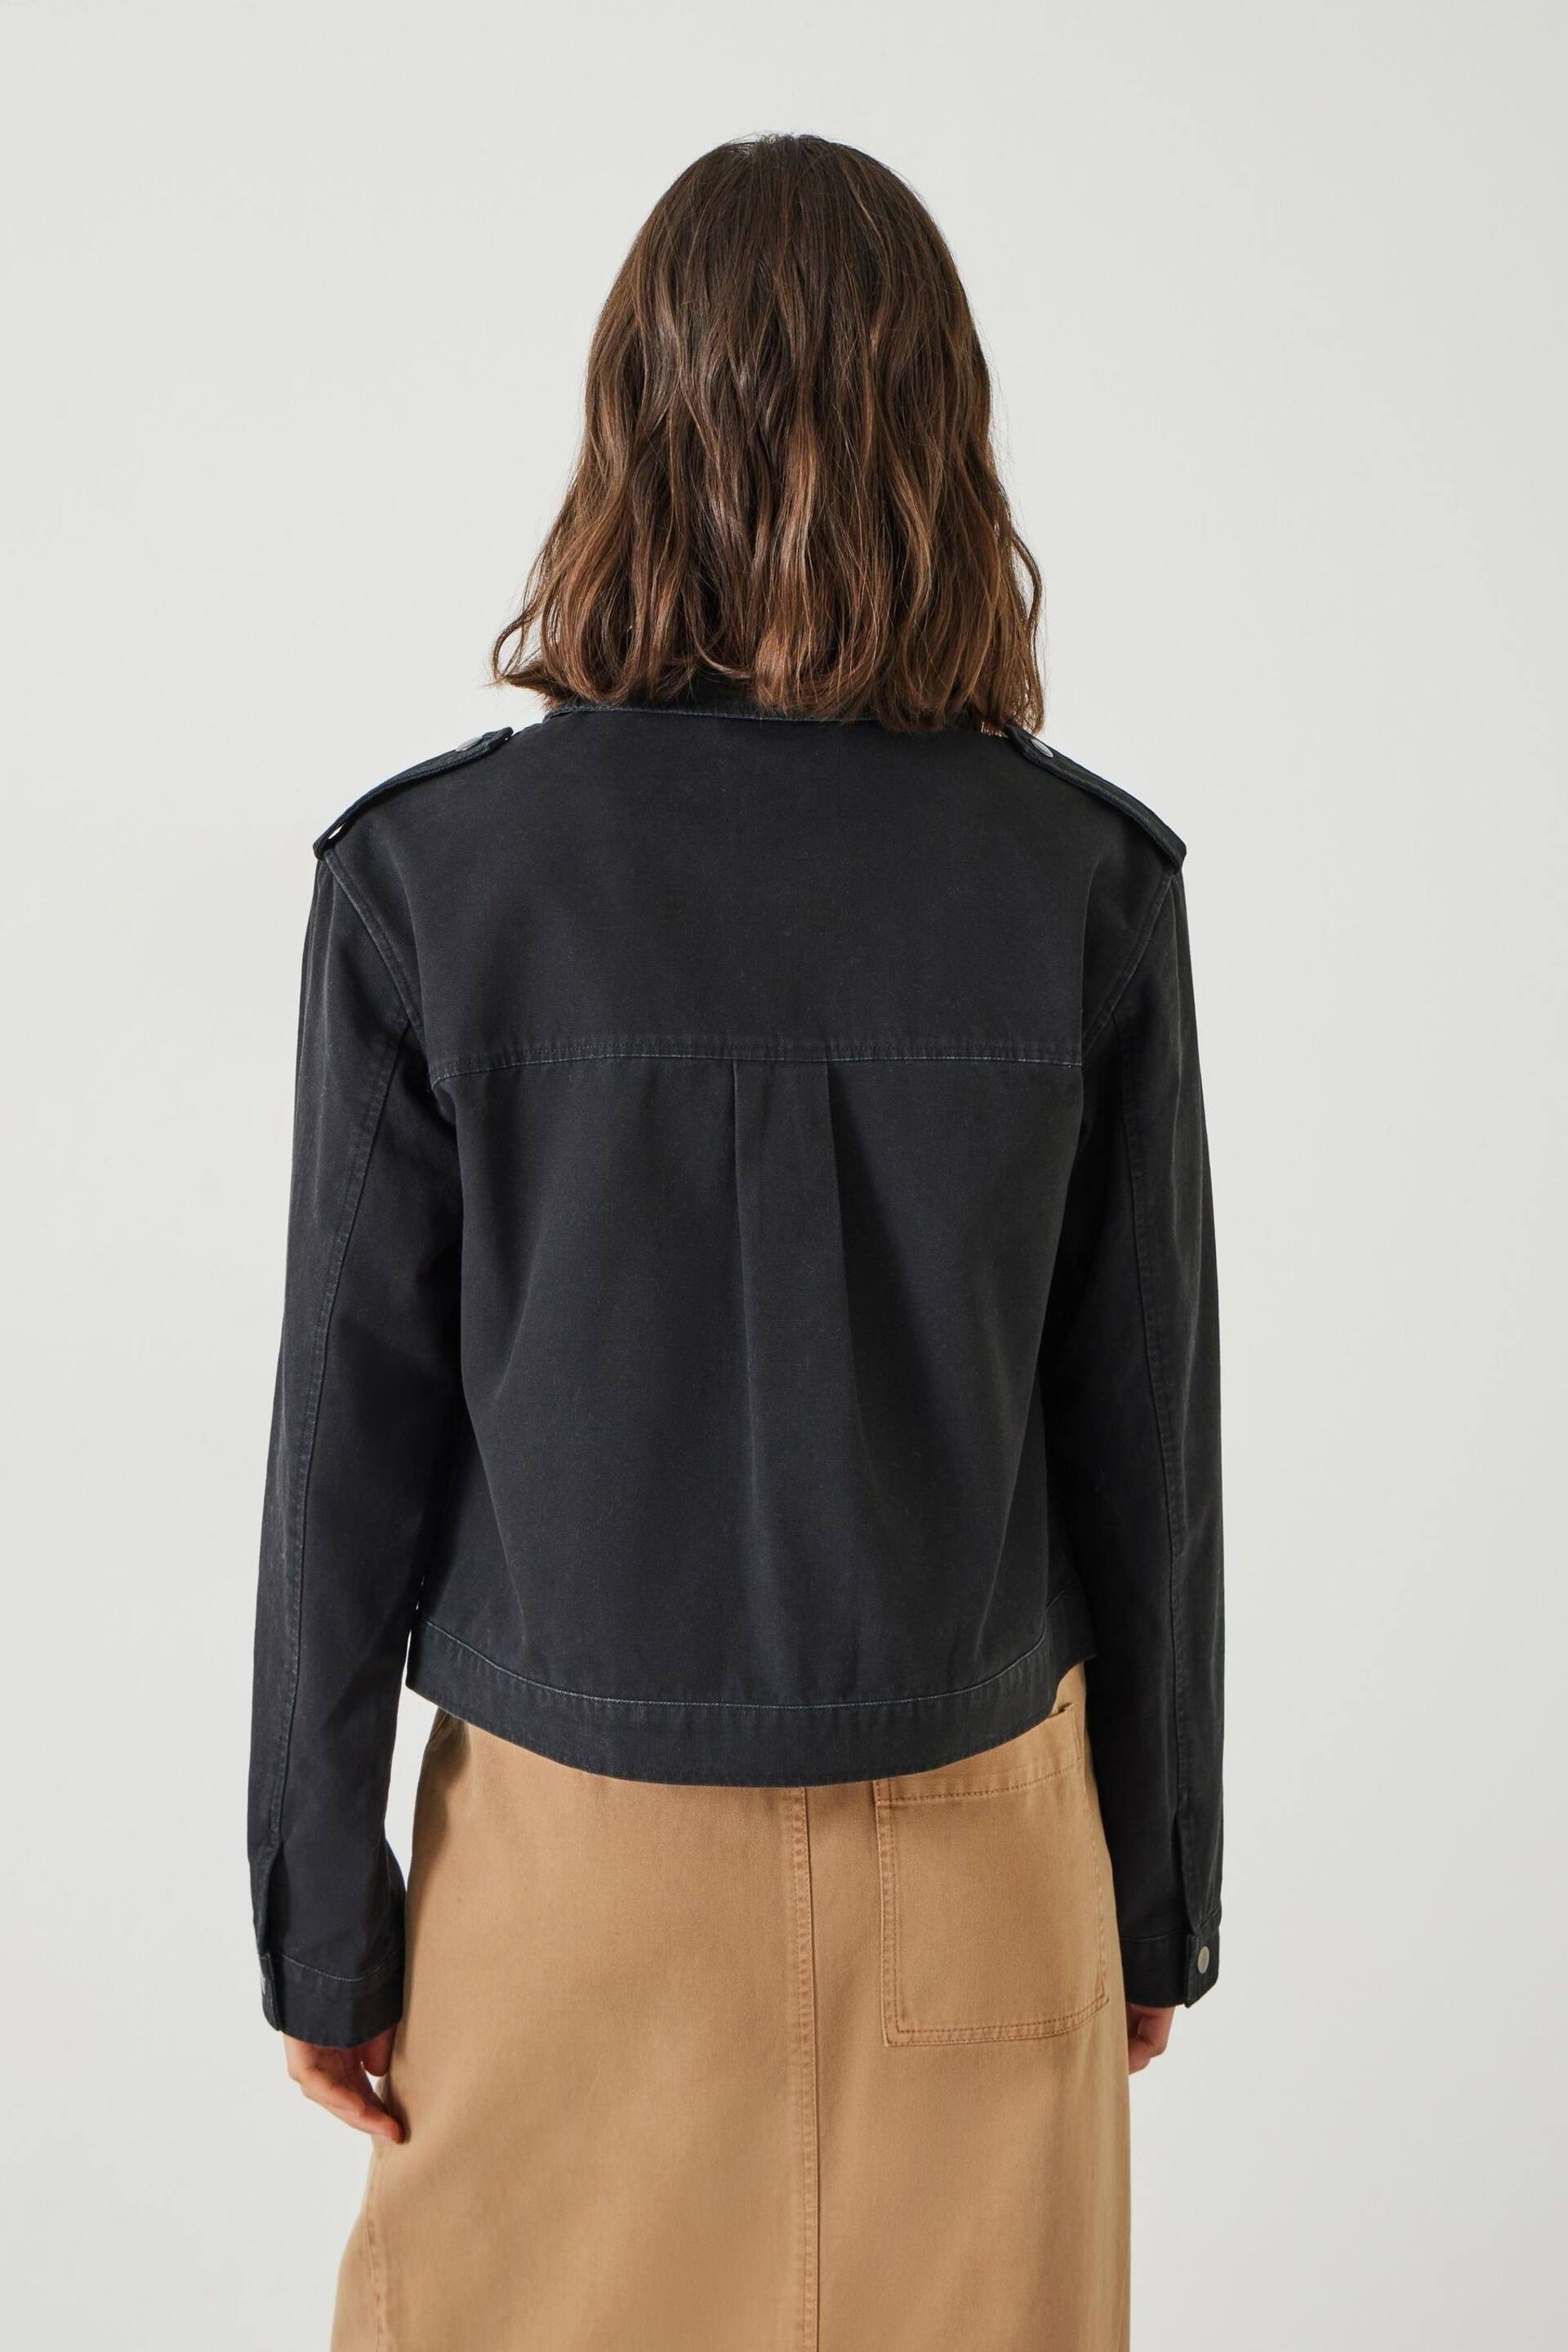 Hush Black Laurie Zip-Up Utility Jacket - Image 2 of 5